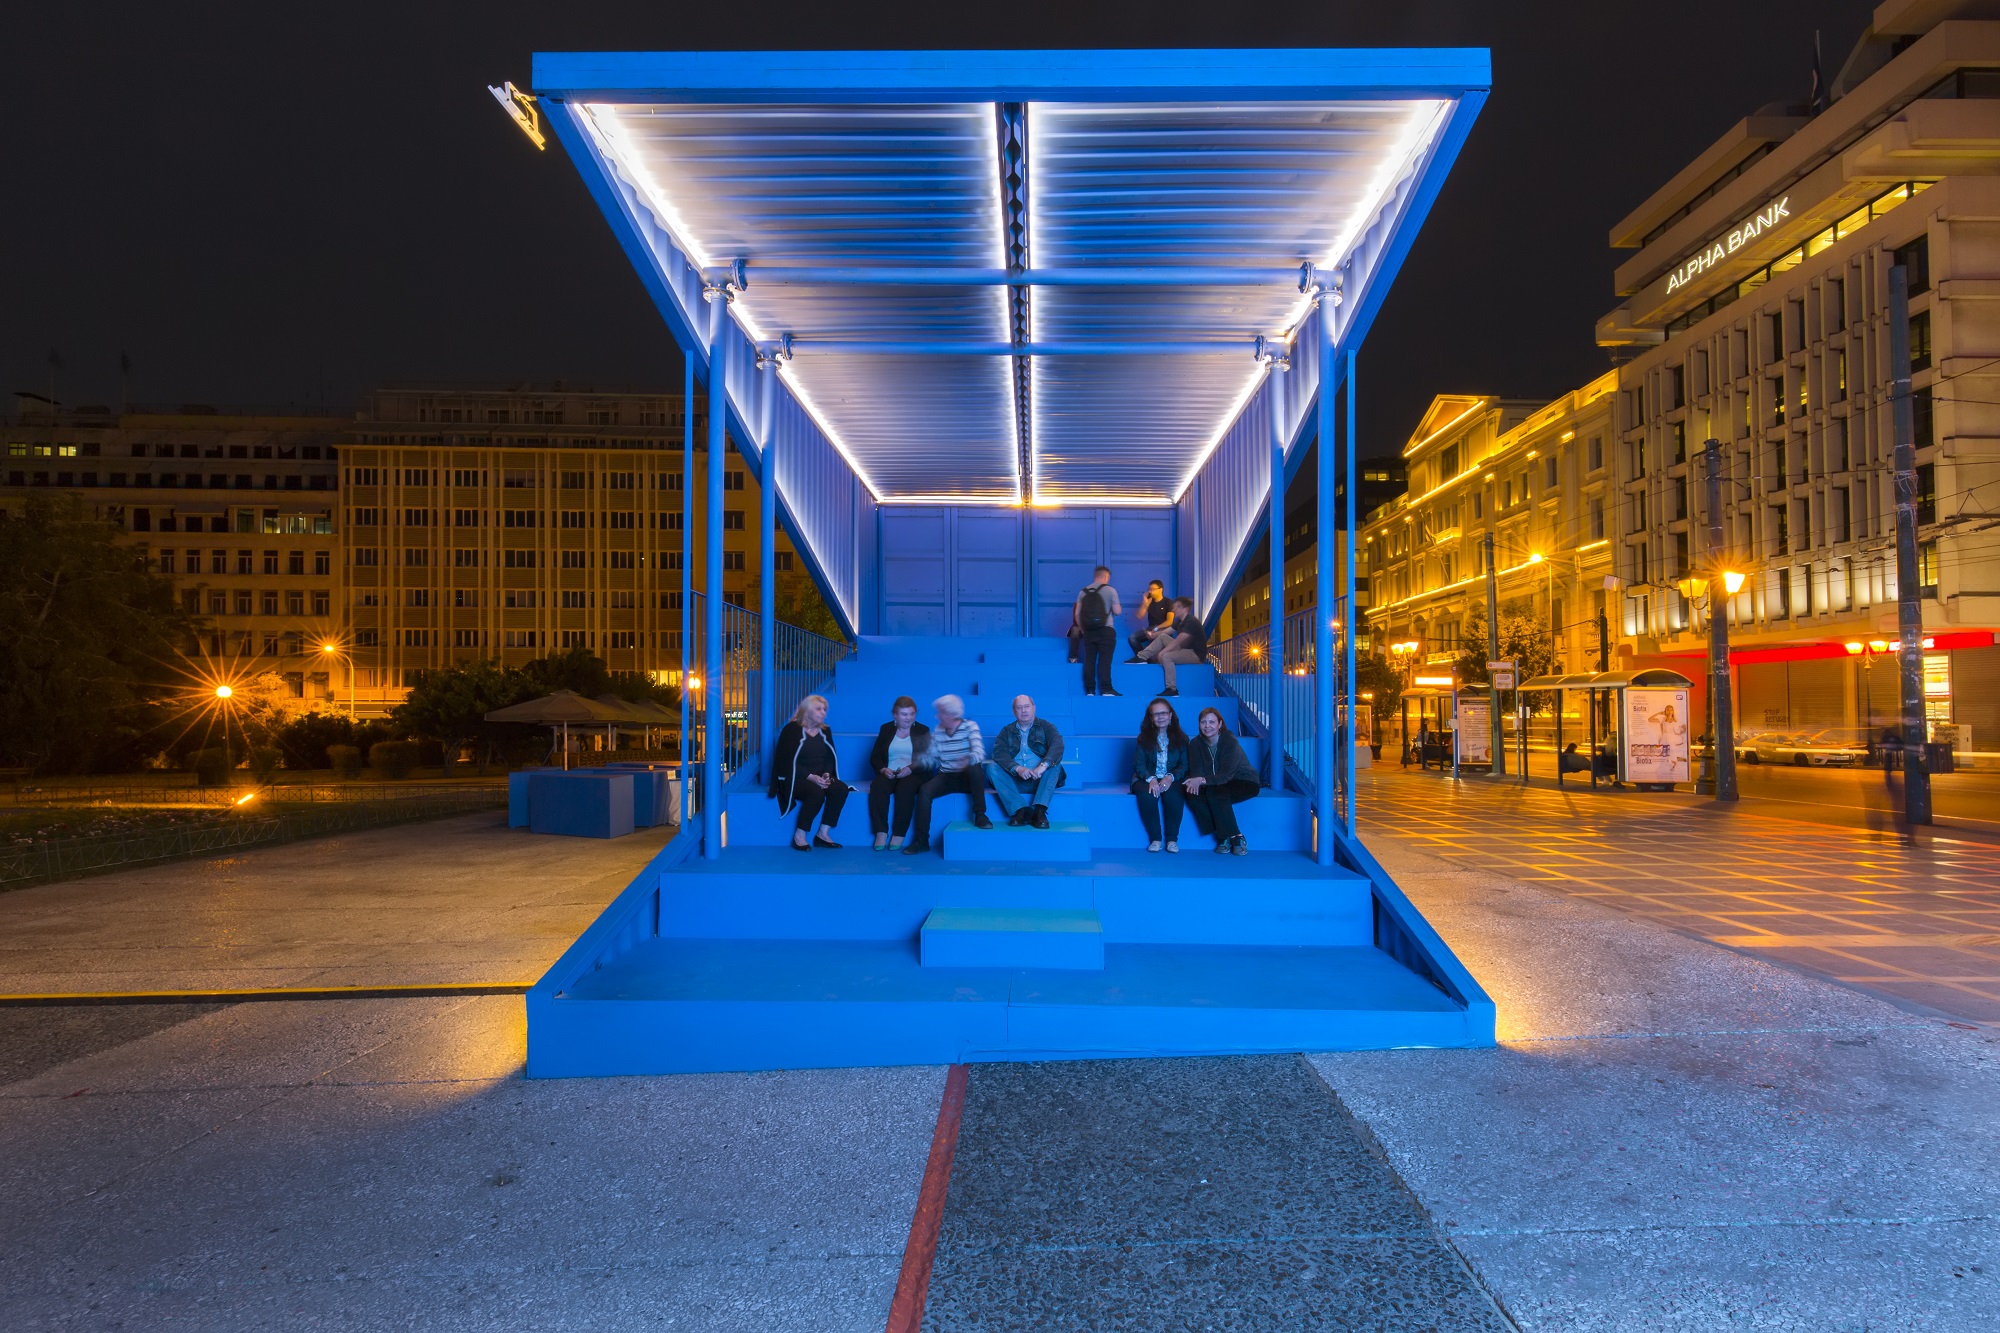 This Mobile Podium is intended for information centers and brainstorming